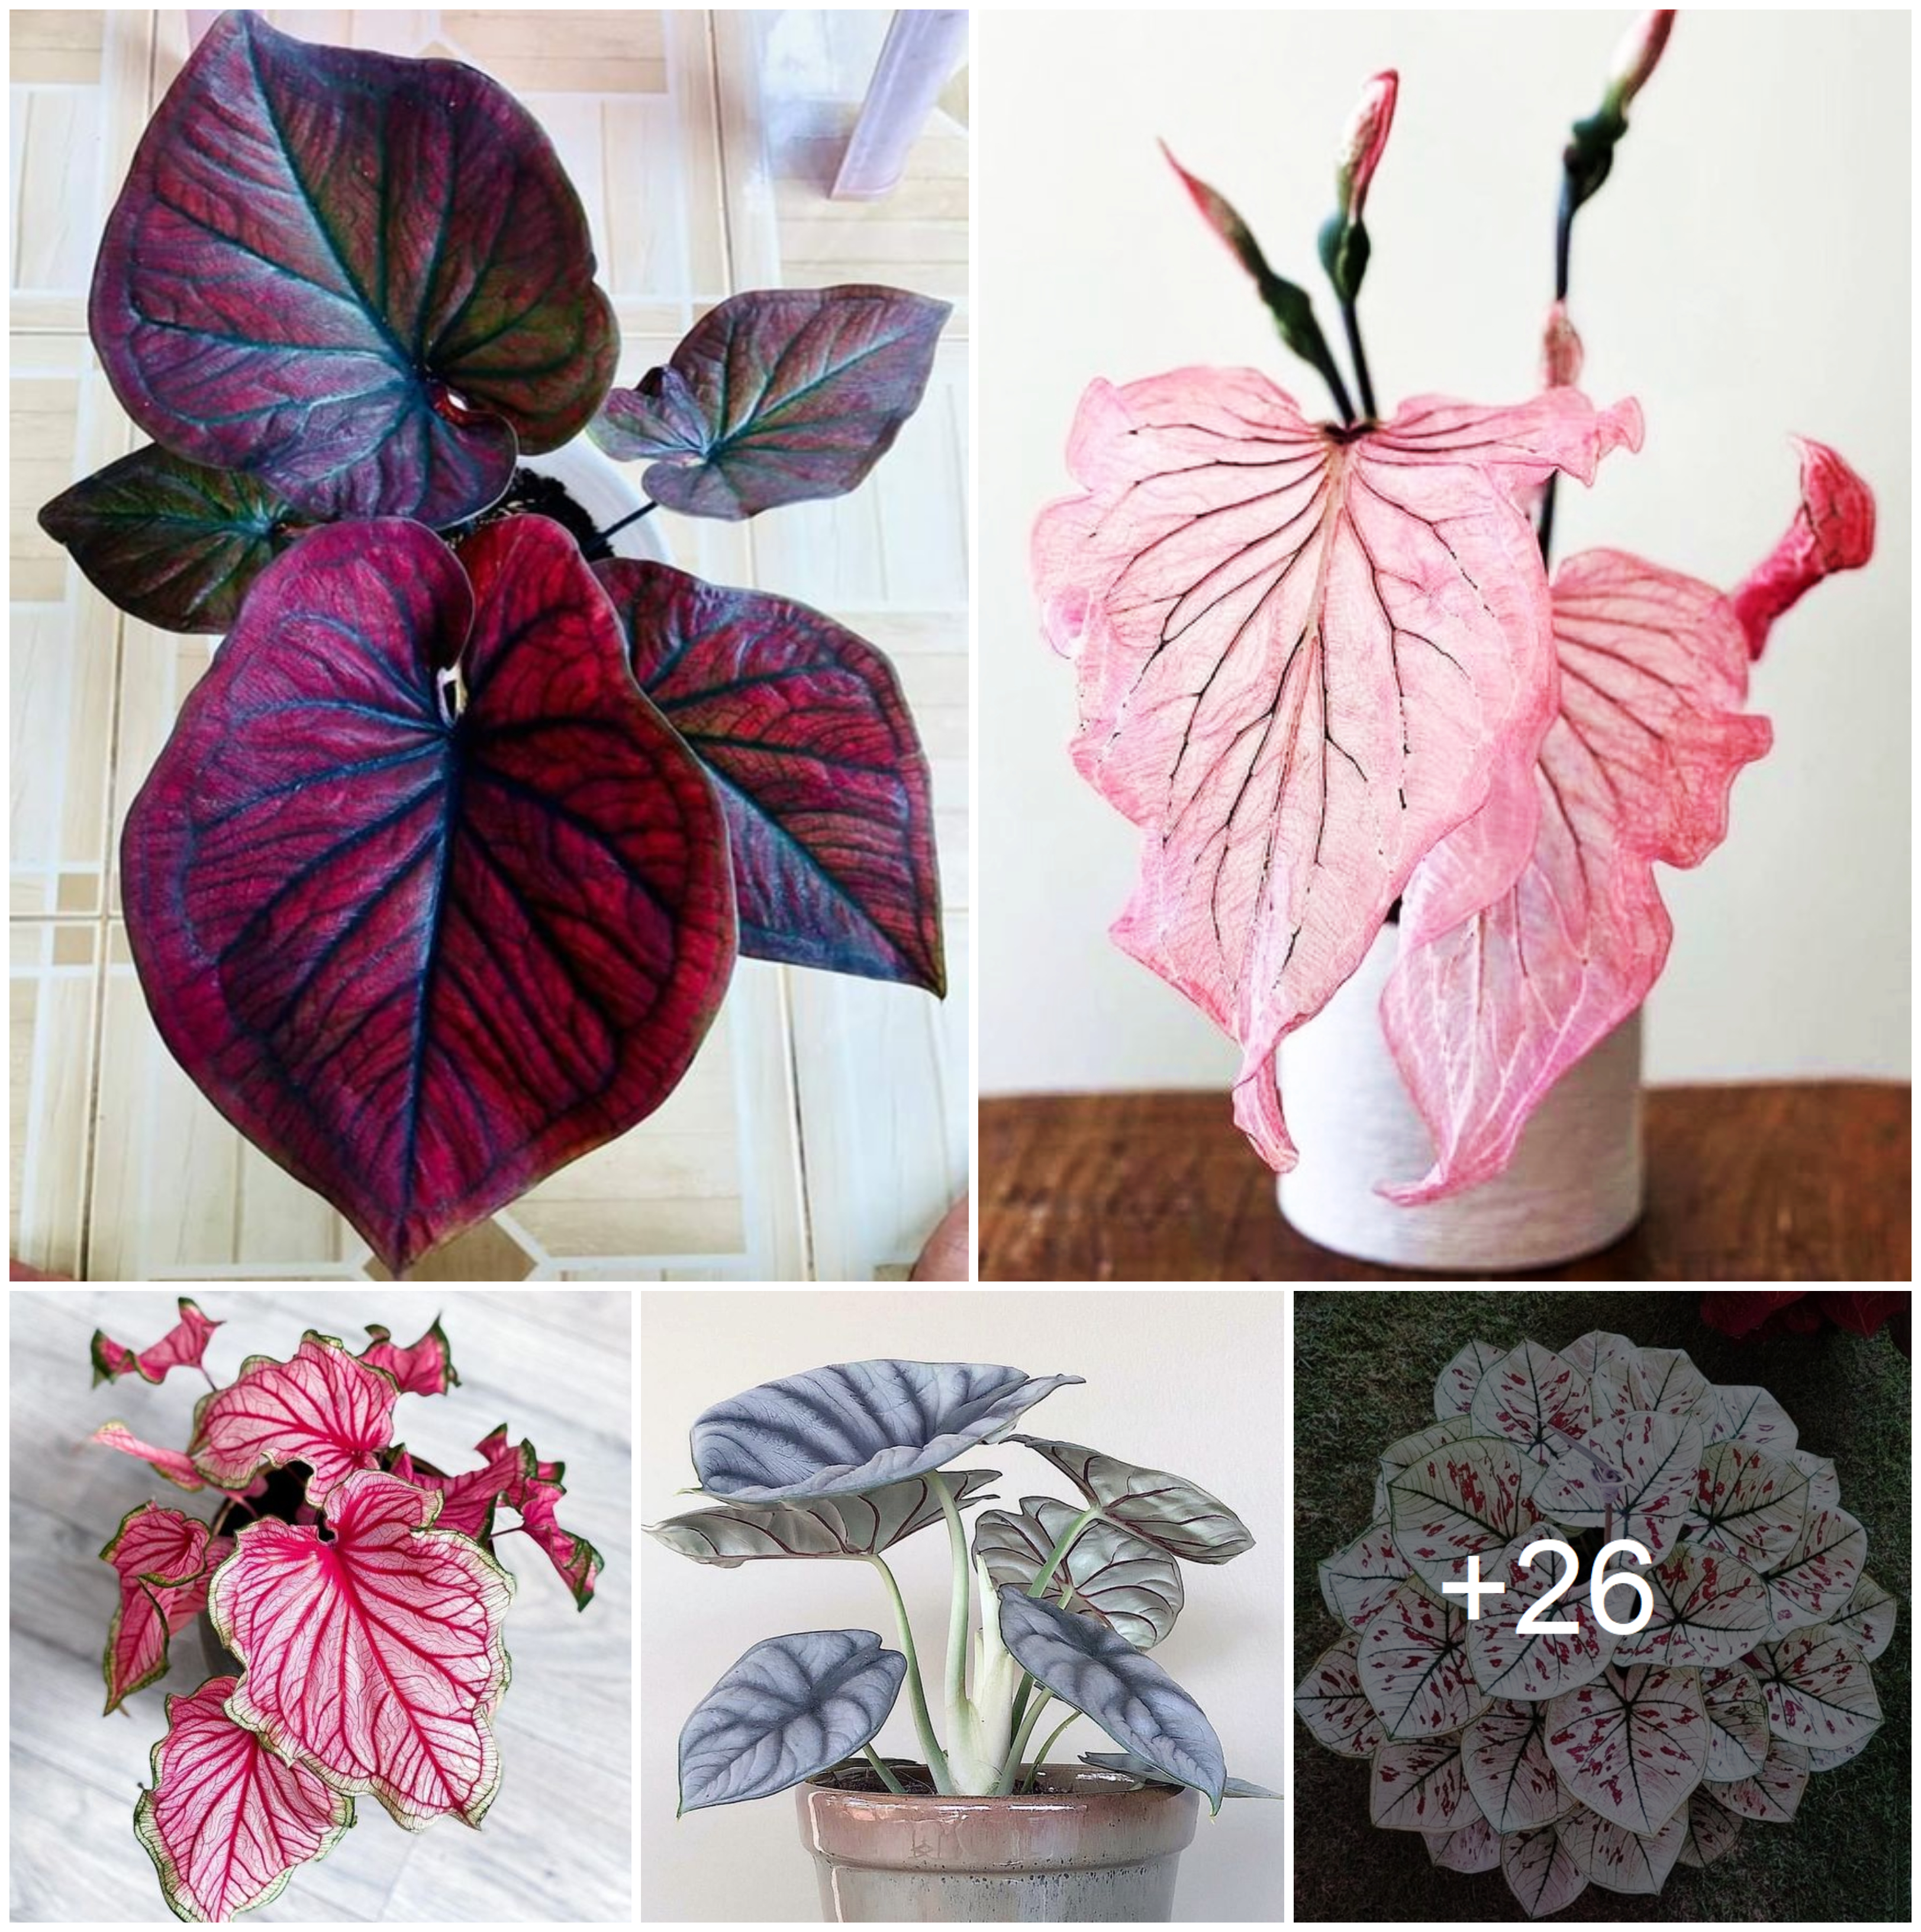 Beautify your home and garden with charming caladium plants